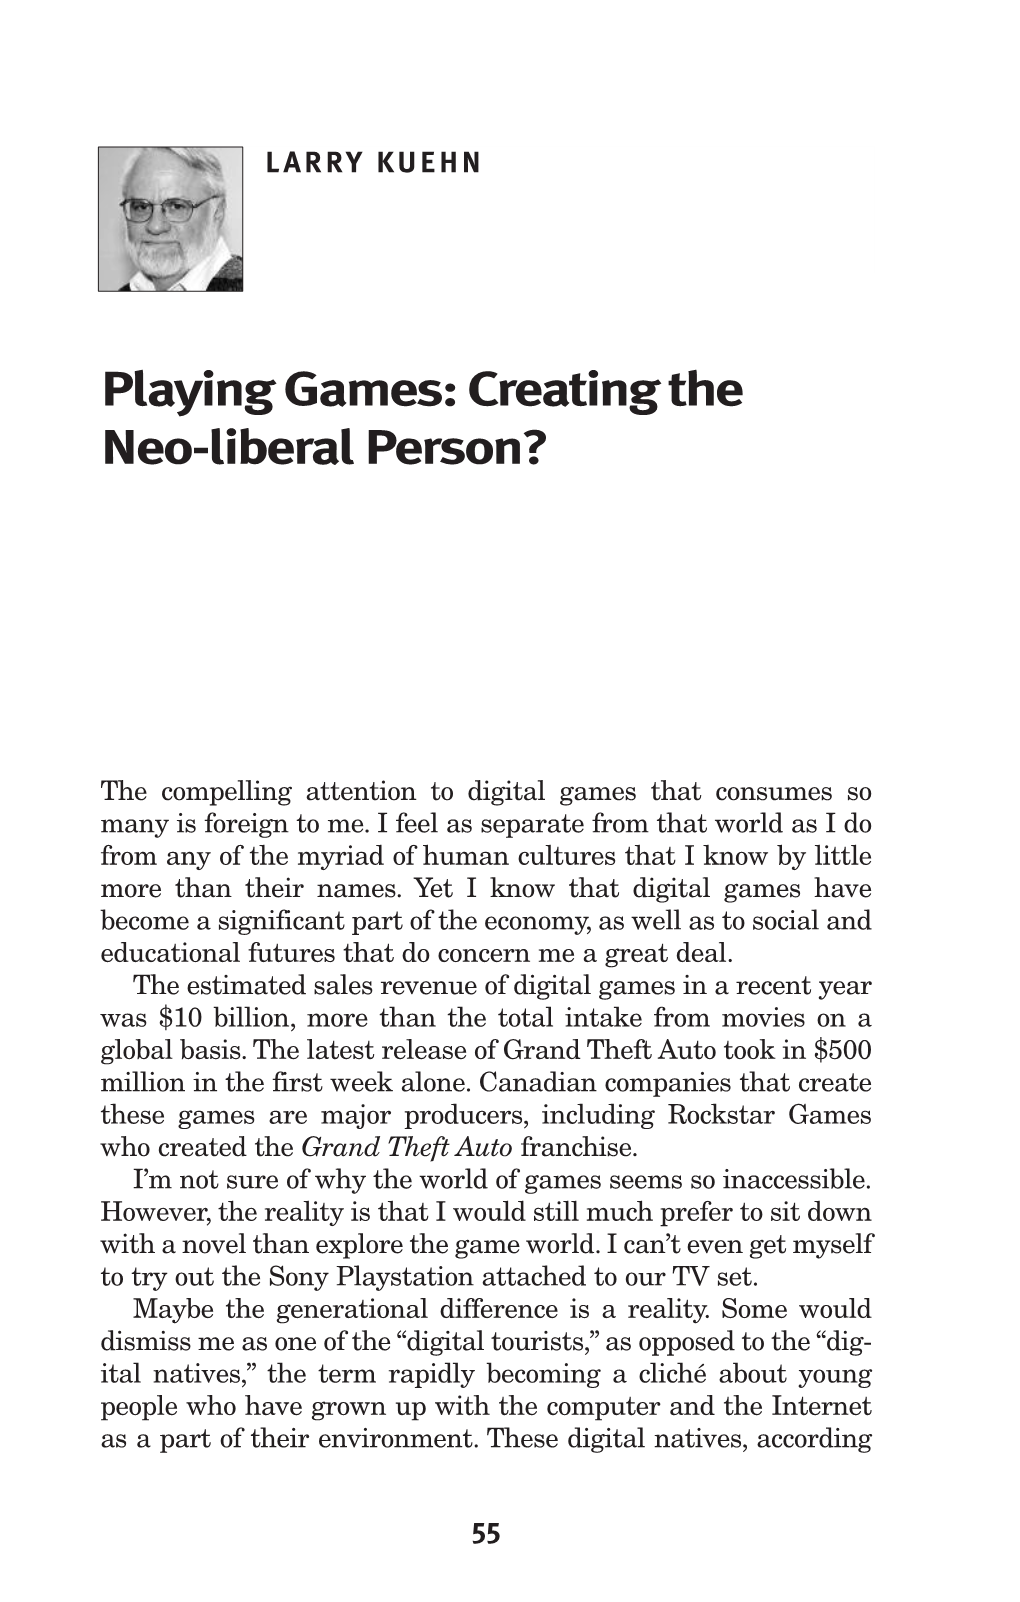 Playing Games: Creating the Neo-Liberal Person?